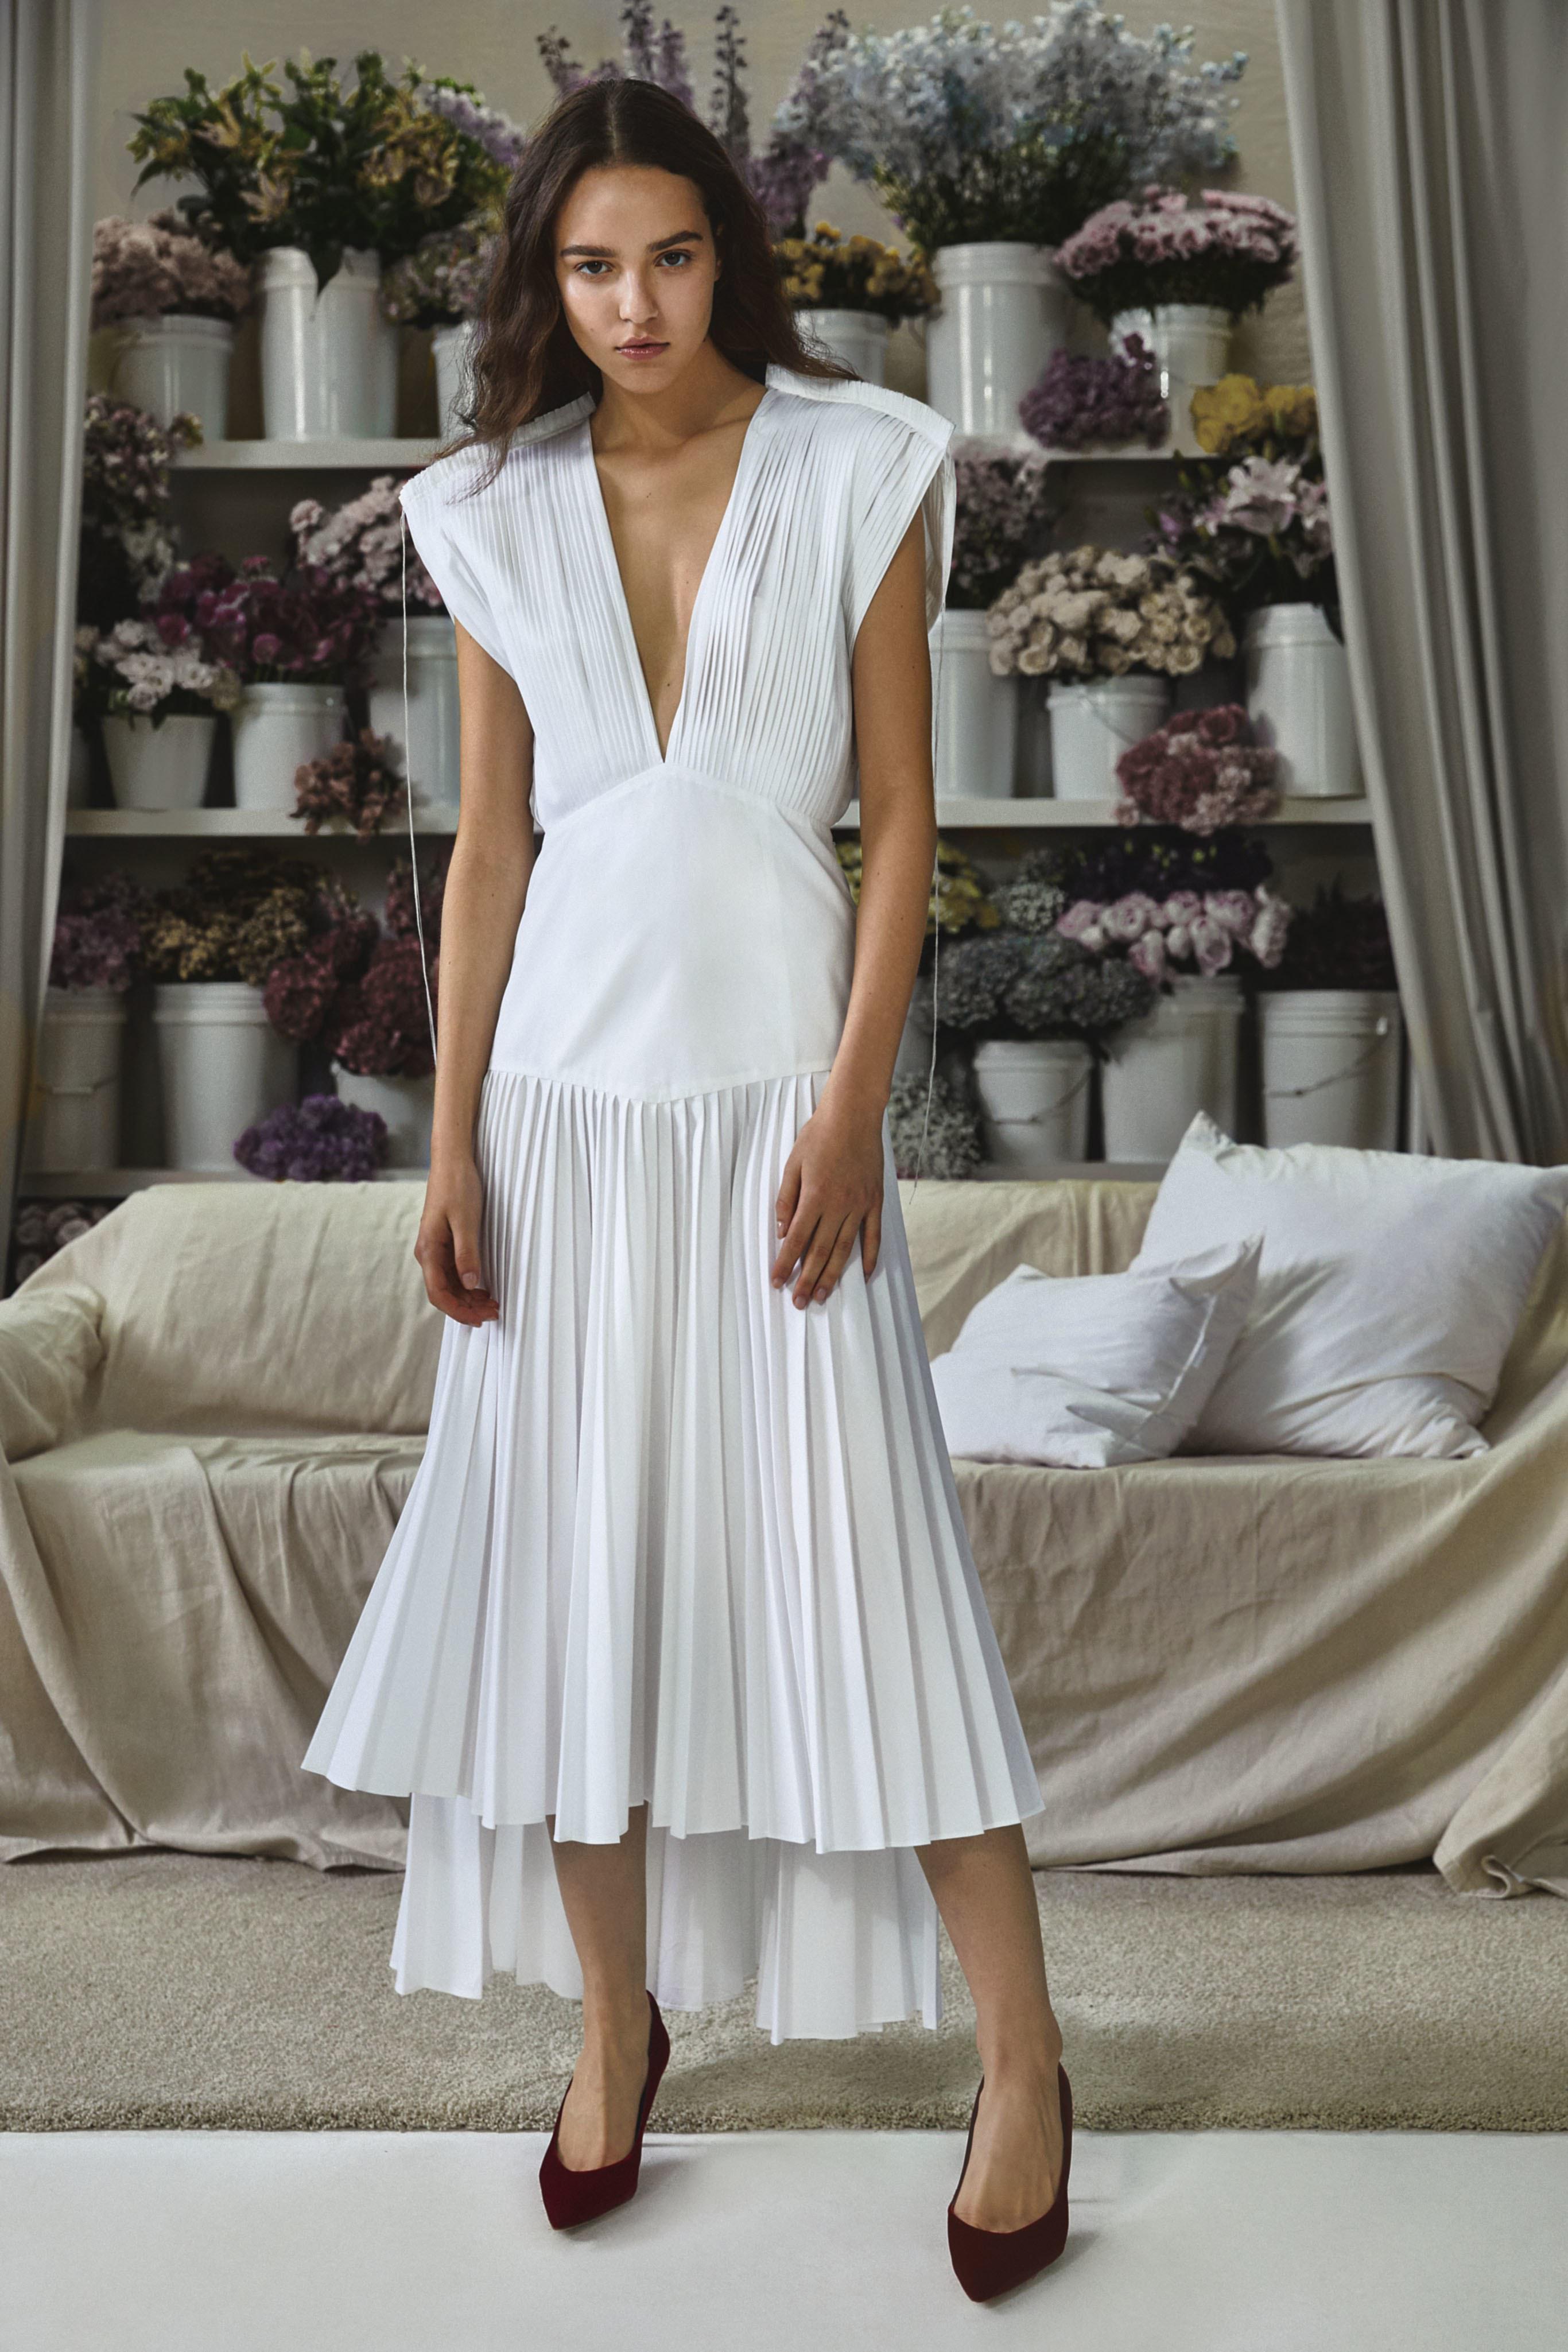 Resort 19 Ready to Wear Report - The Lane